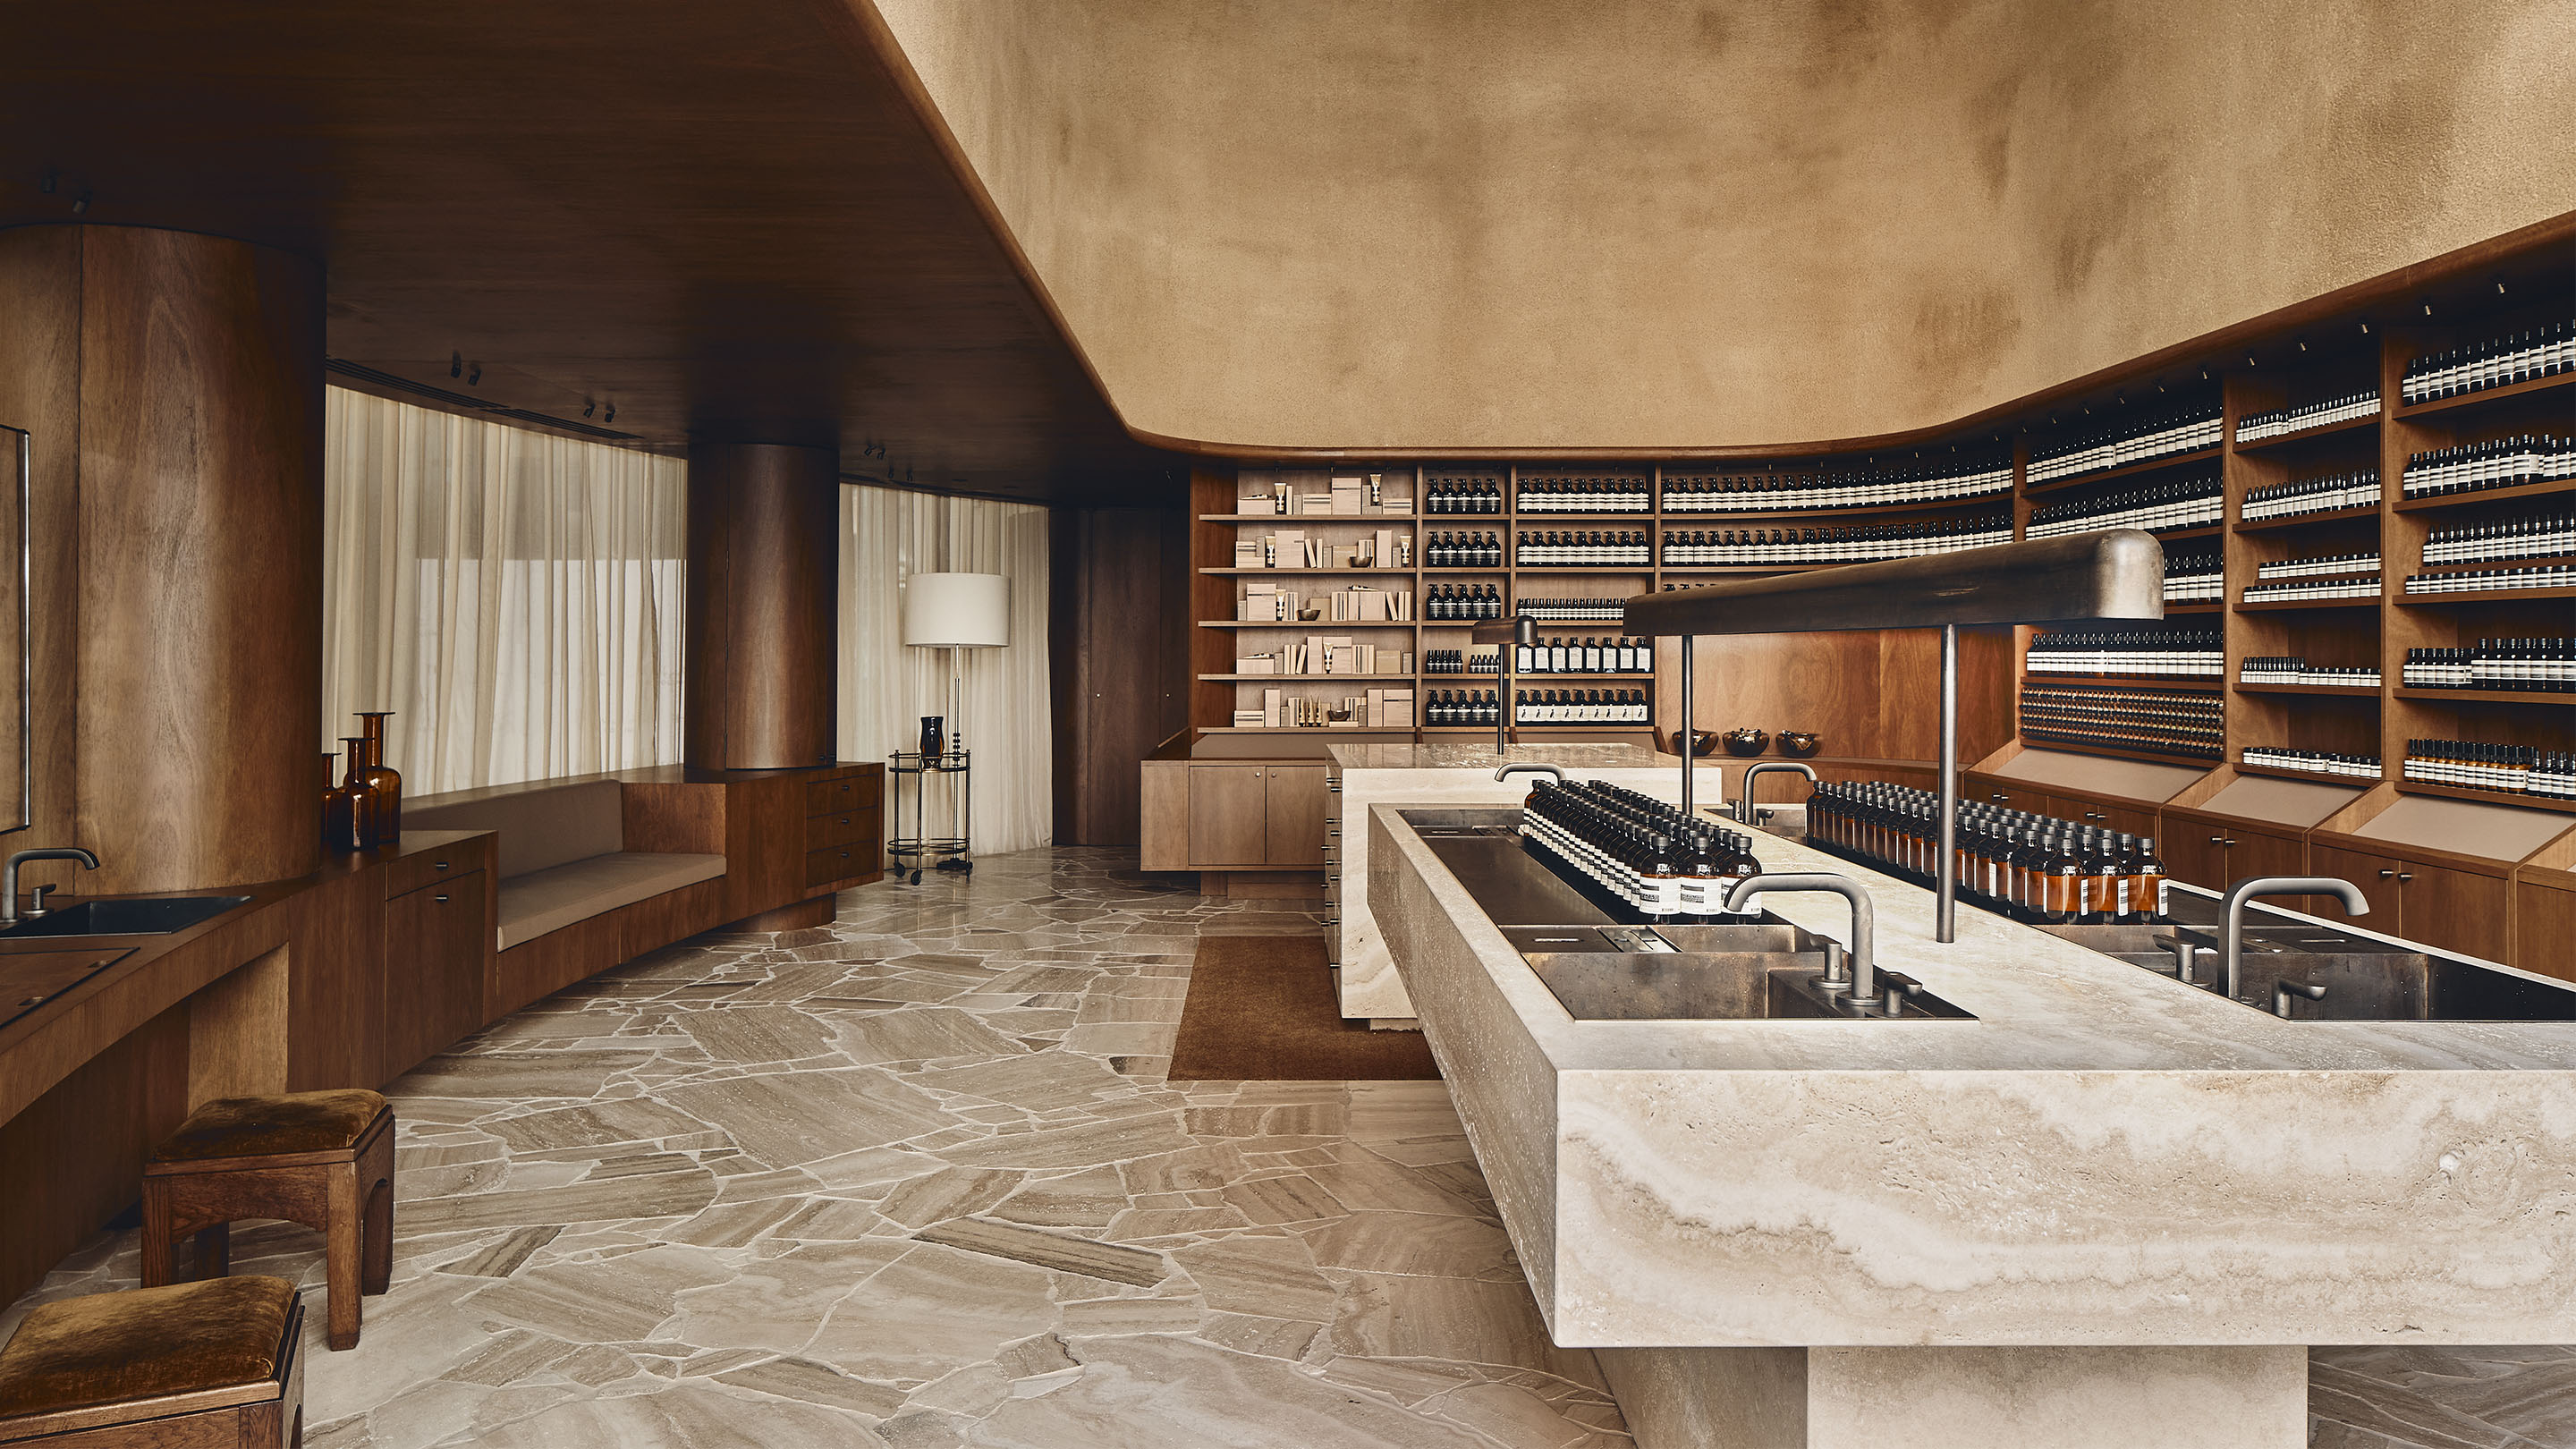 The store interior featuring travertine off-cut terrazzo floors accompanied by wooden interior walls